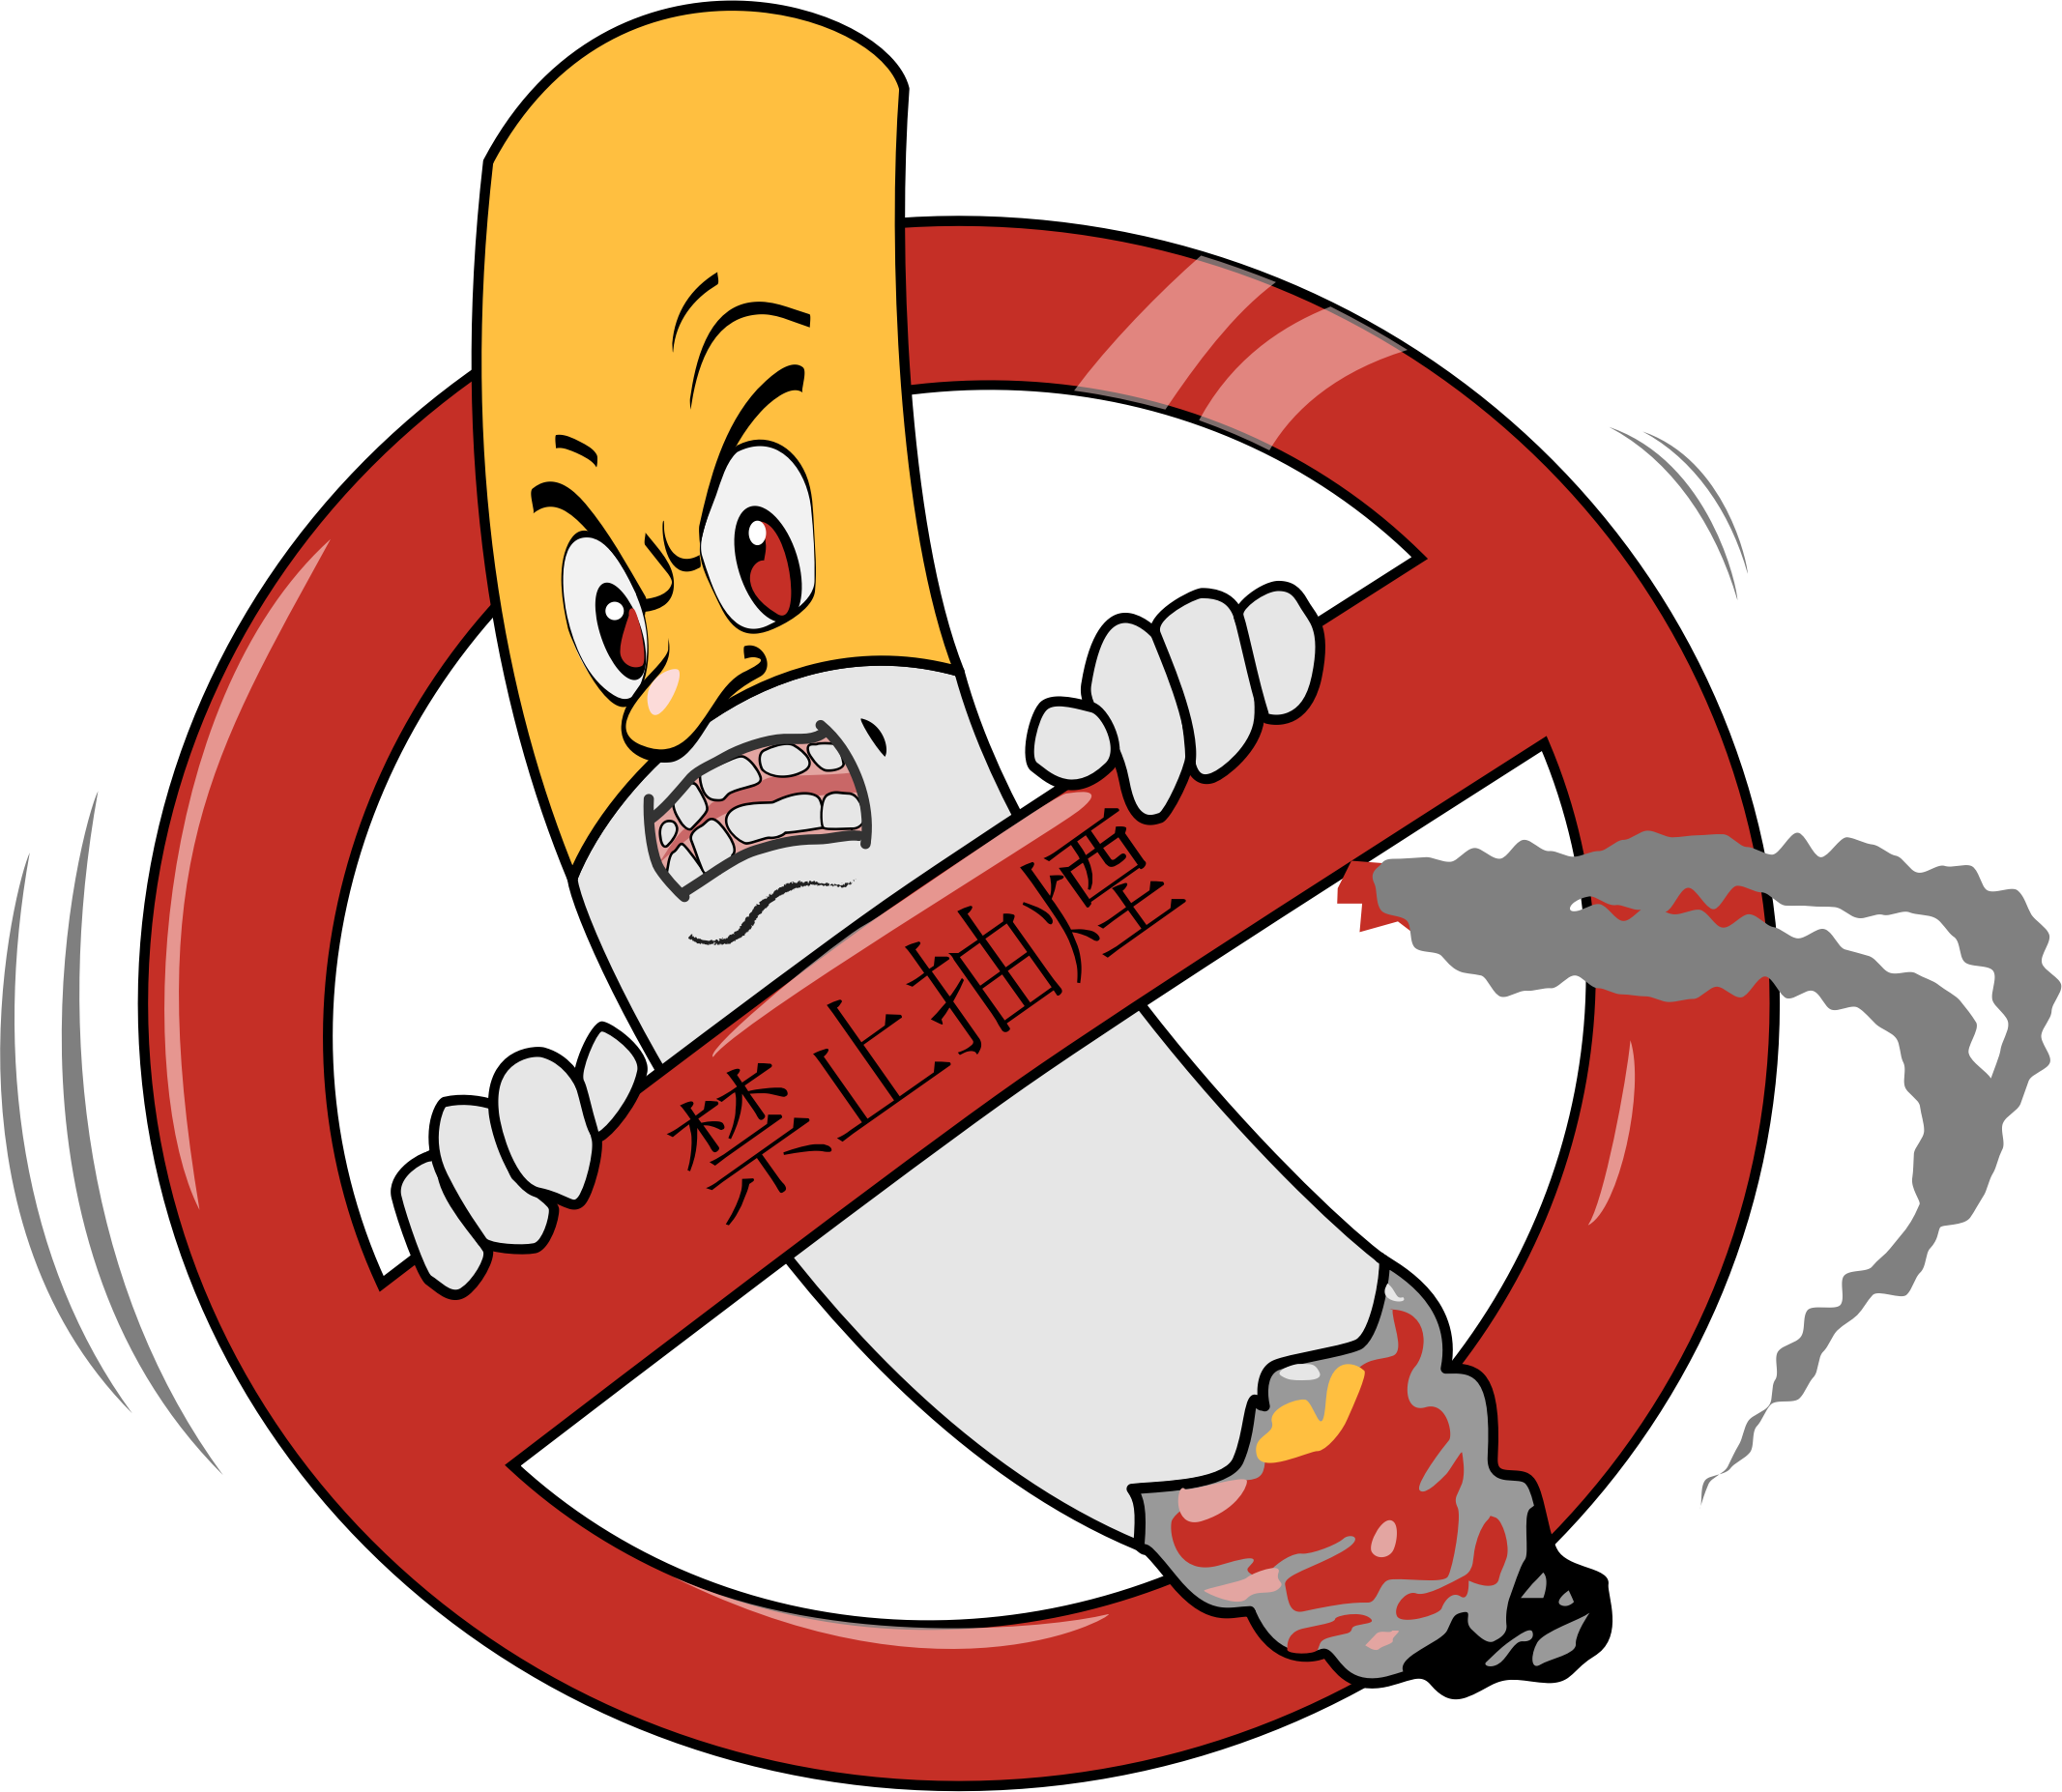 No Smoking Clipart Please - Poster Making About No Smoking (2133x1854)